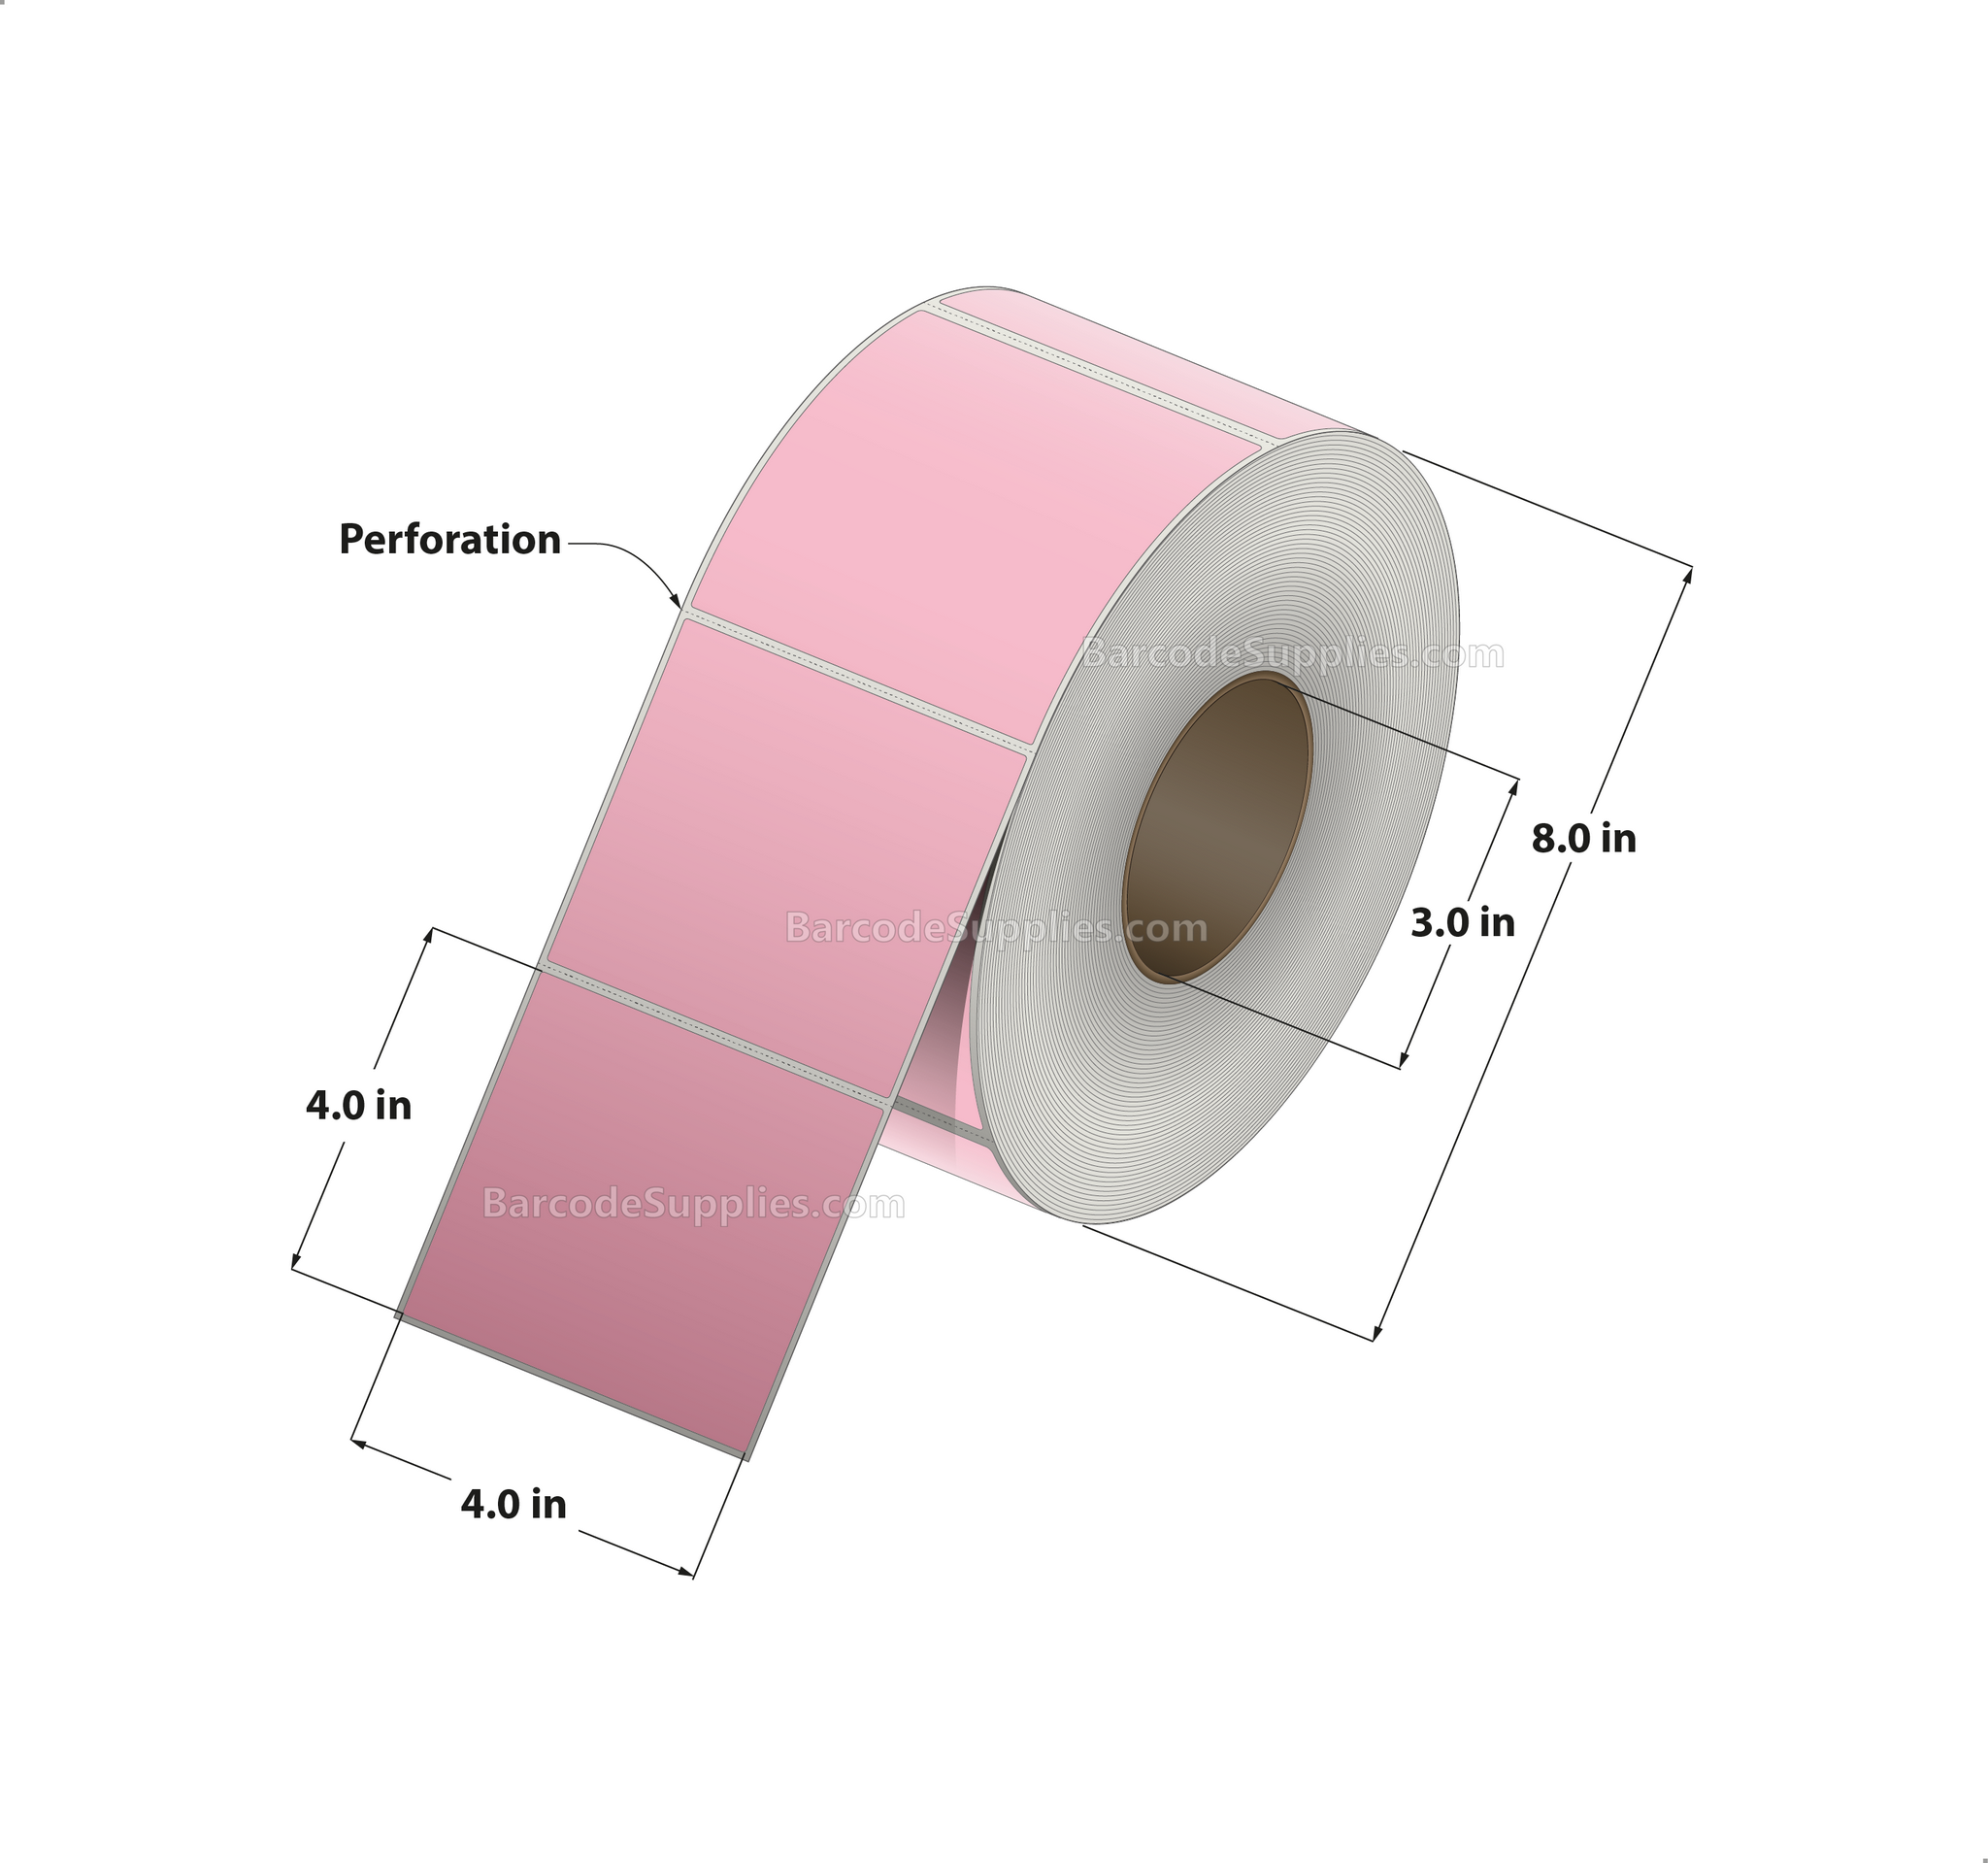 4 x 4 Thermal Transfer 176 Pink Labels With Permanent Adhesive - Perforated - 1500 Labels Per Roll - Carton Of 4 Rolls - 6000 Labels Total - MPN: RFC-4-4-1500-PK